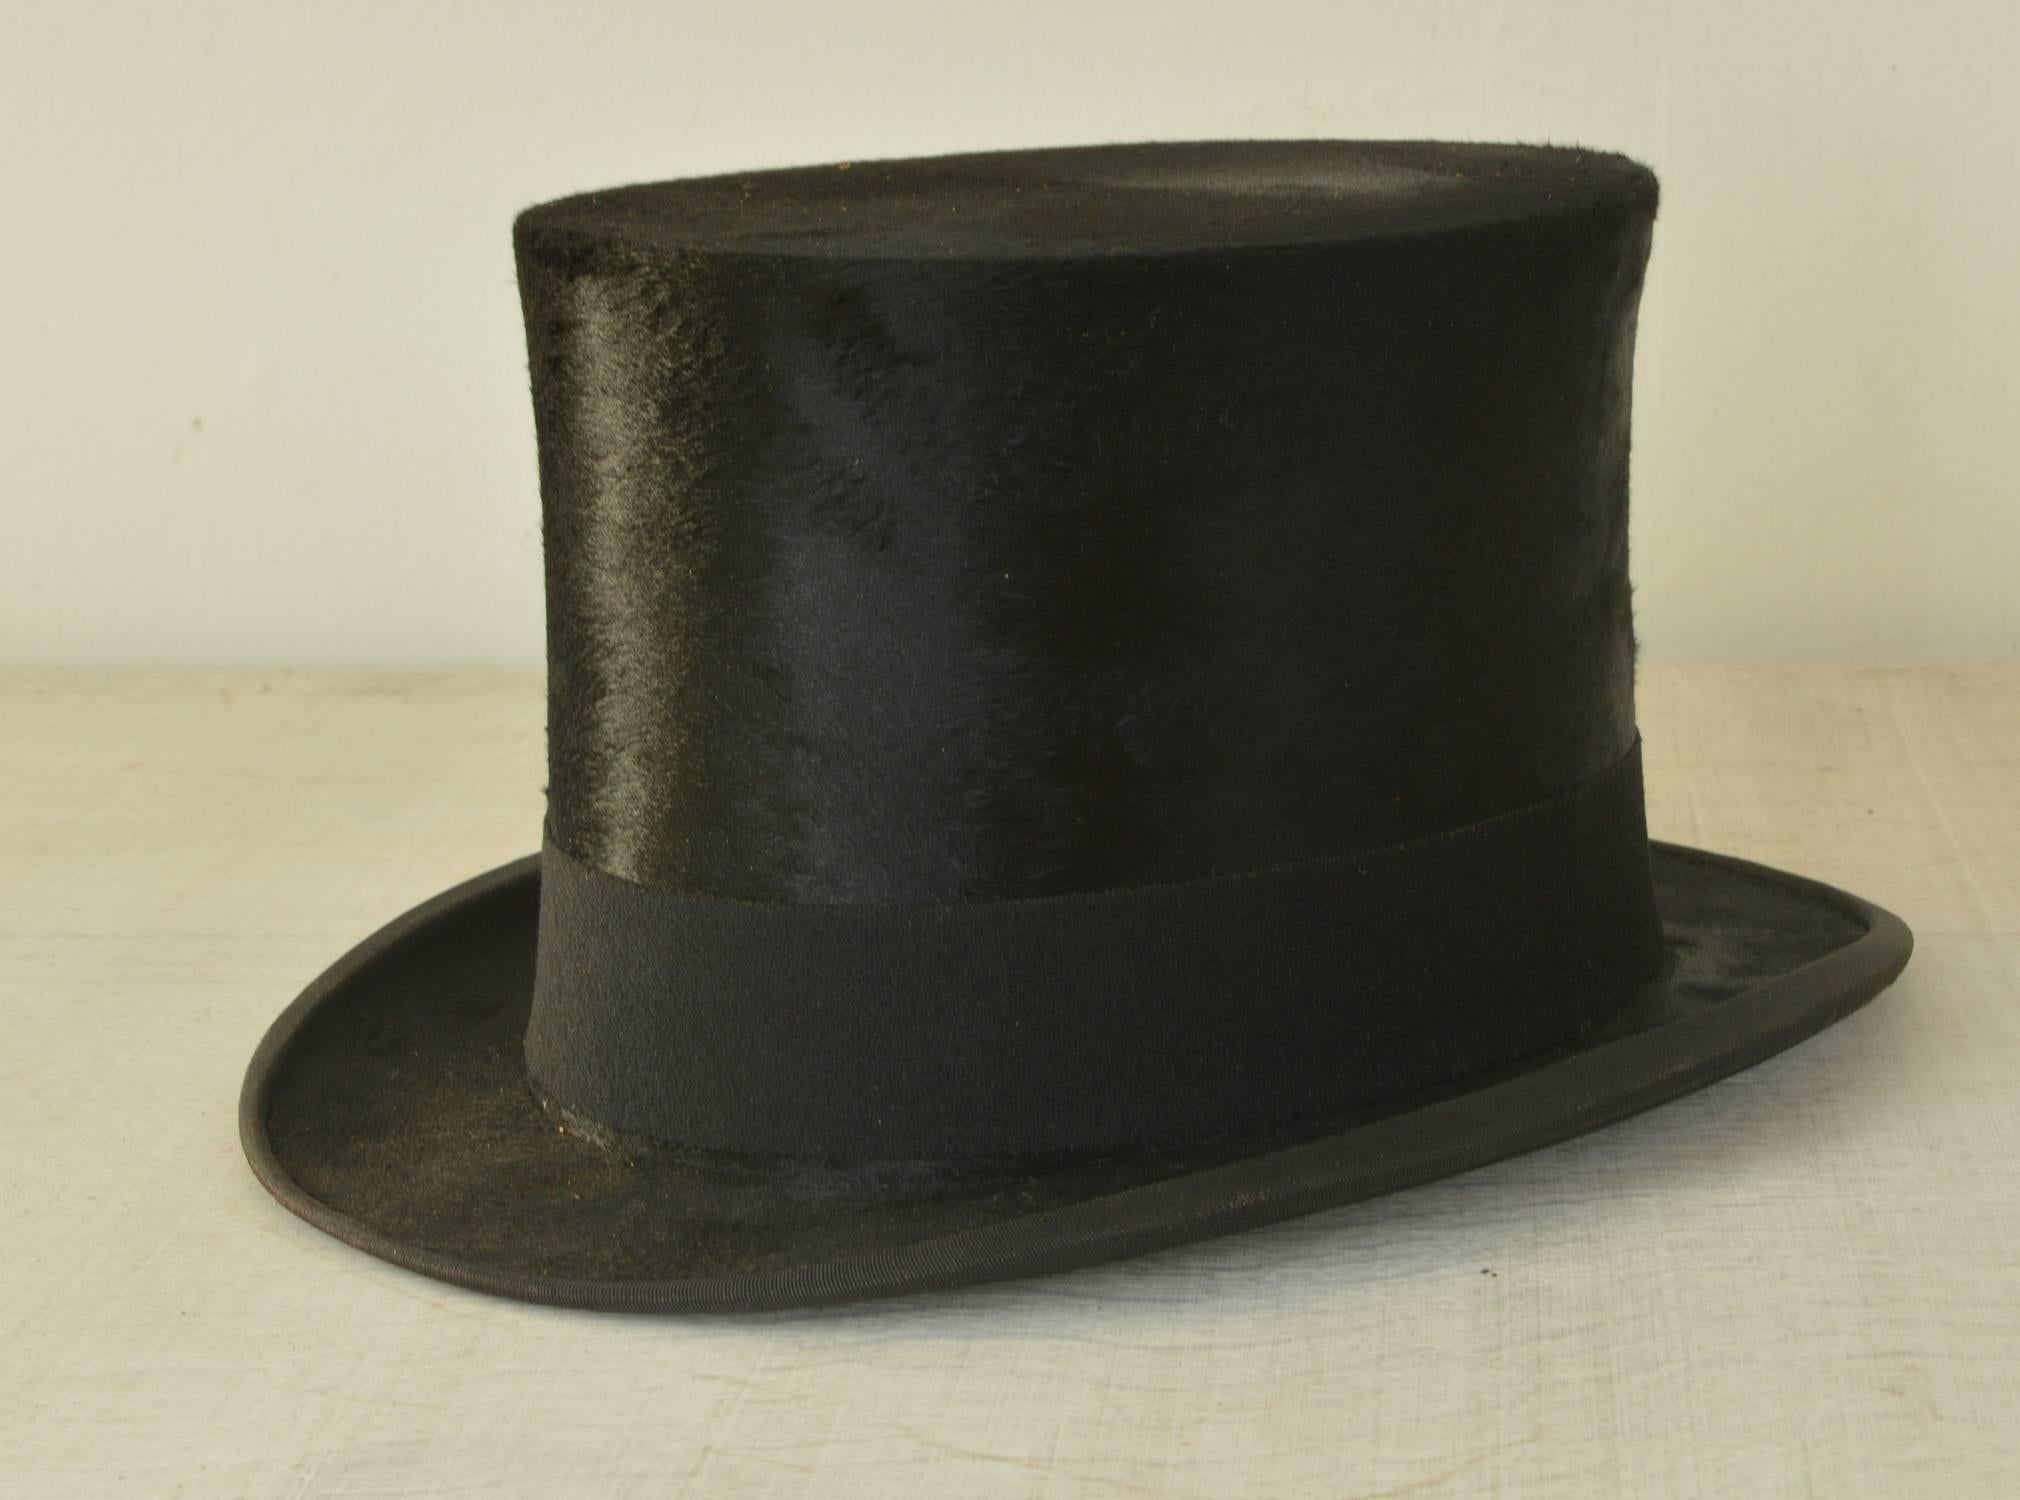 A very fine plush silk top hat made by Alfred Pellett of Manchester in excellent wearable condition.

The interior is made of cream satin and fine cream leather with a printed armorial makers mark at the top.

Their is no evidence of the size on